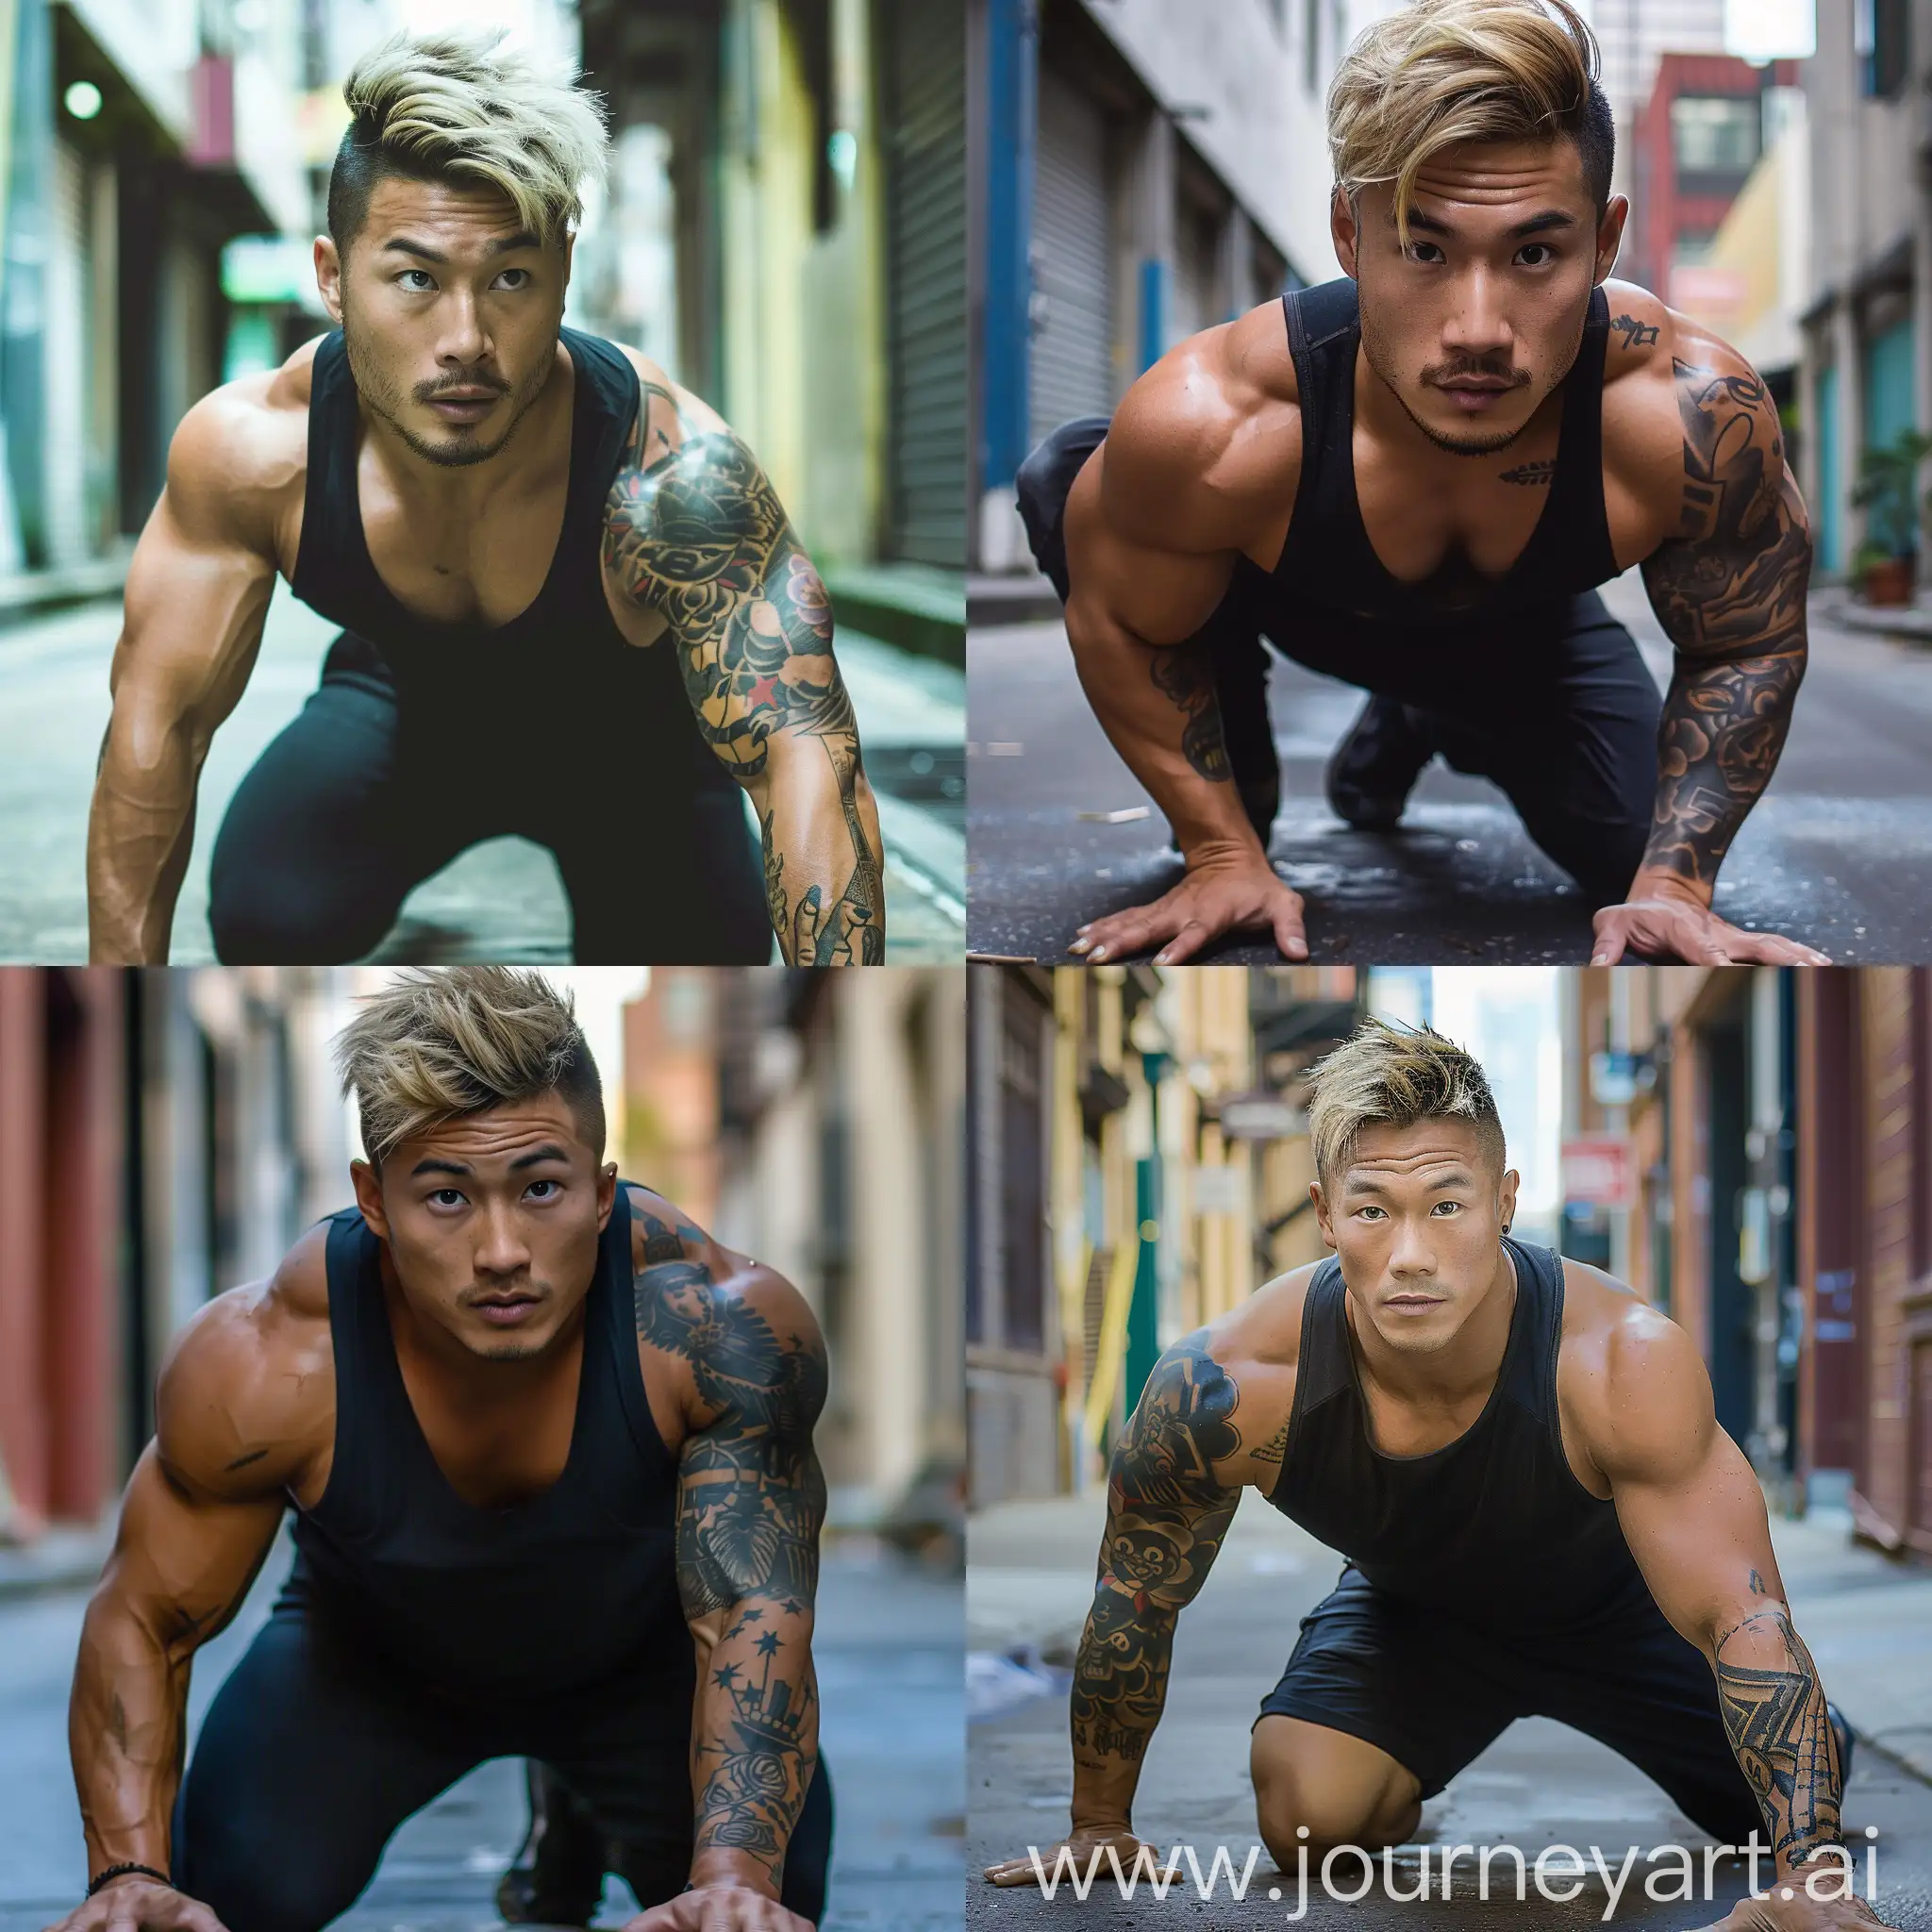 A handsome burly Asian man with blond dyed hair, muscular beefy asian man wearing black tank top, handsome good looking face, crawling on all four,  with one arm covered in tattoos, short blond-dyed hair, at an alley background 